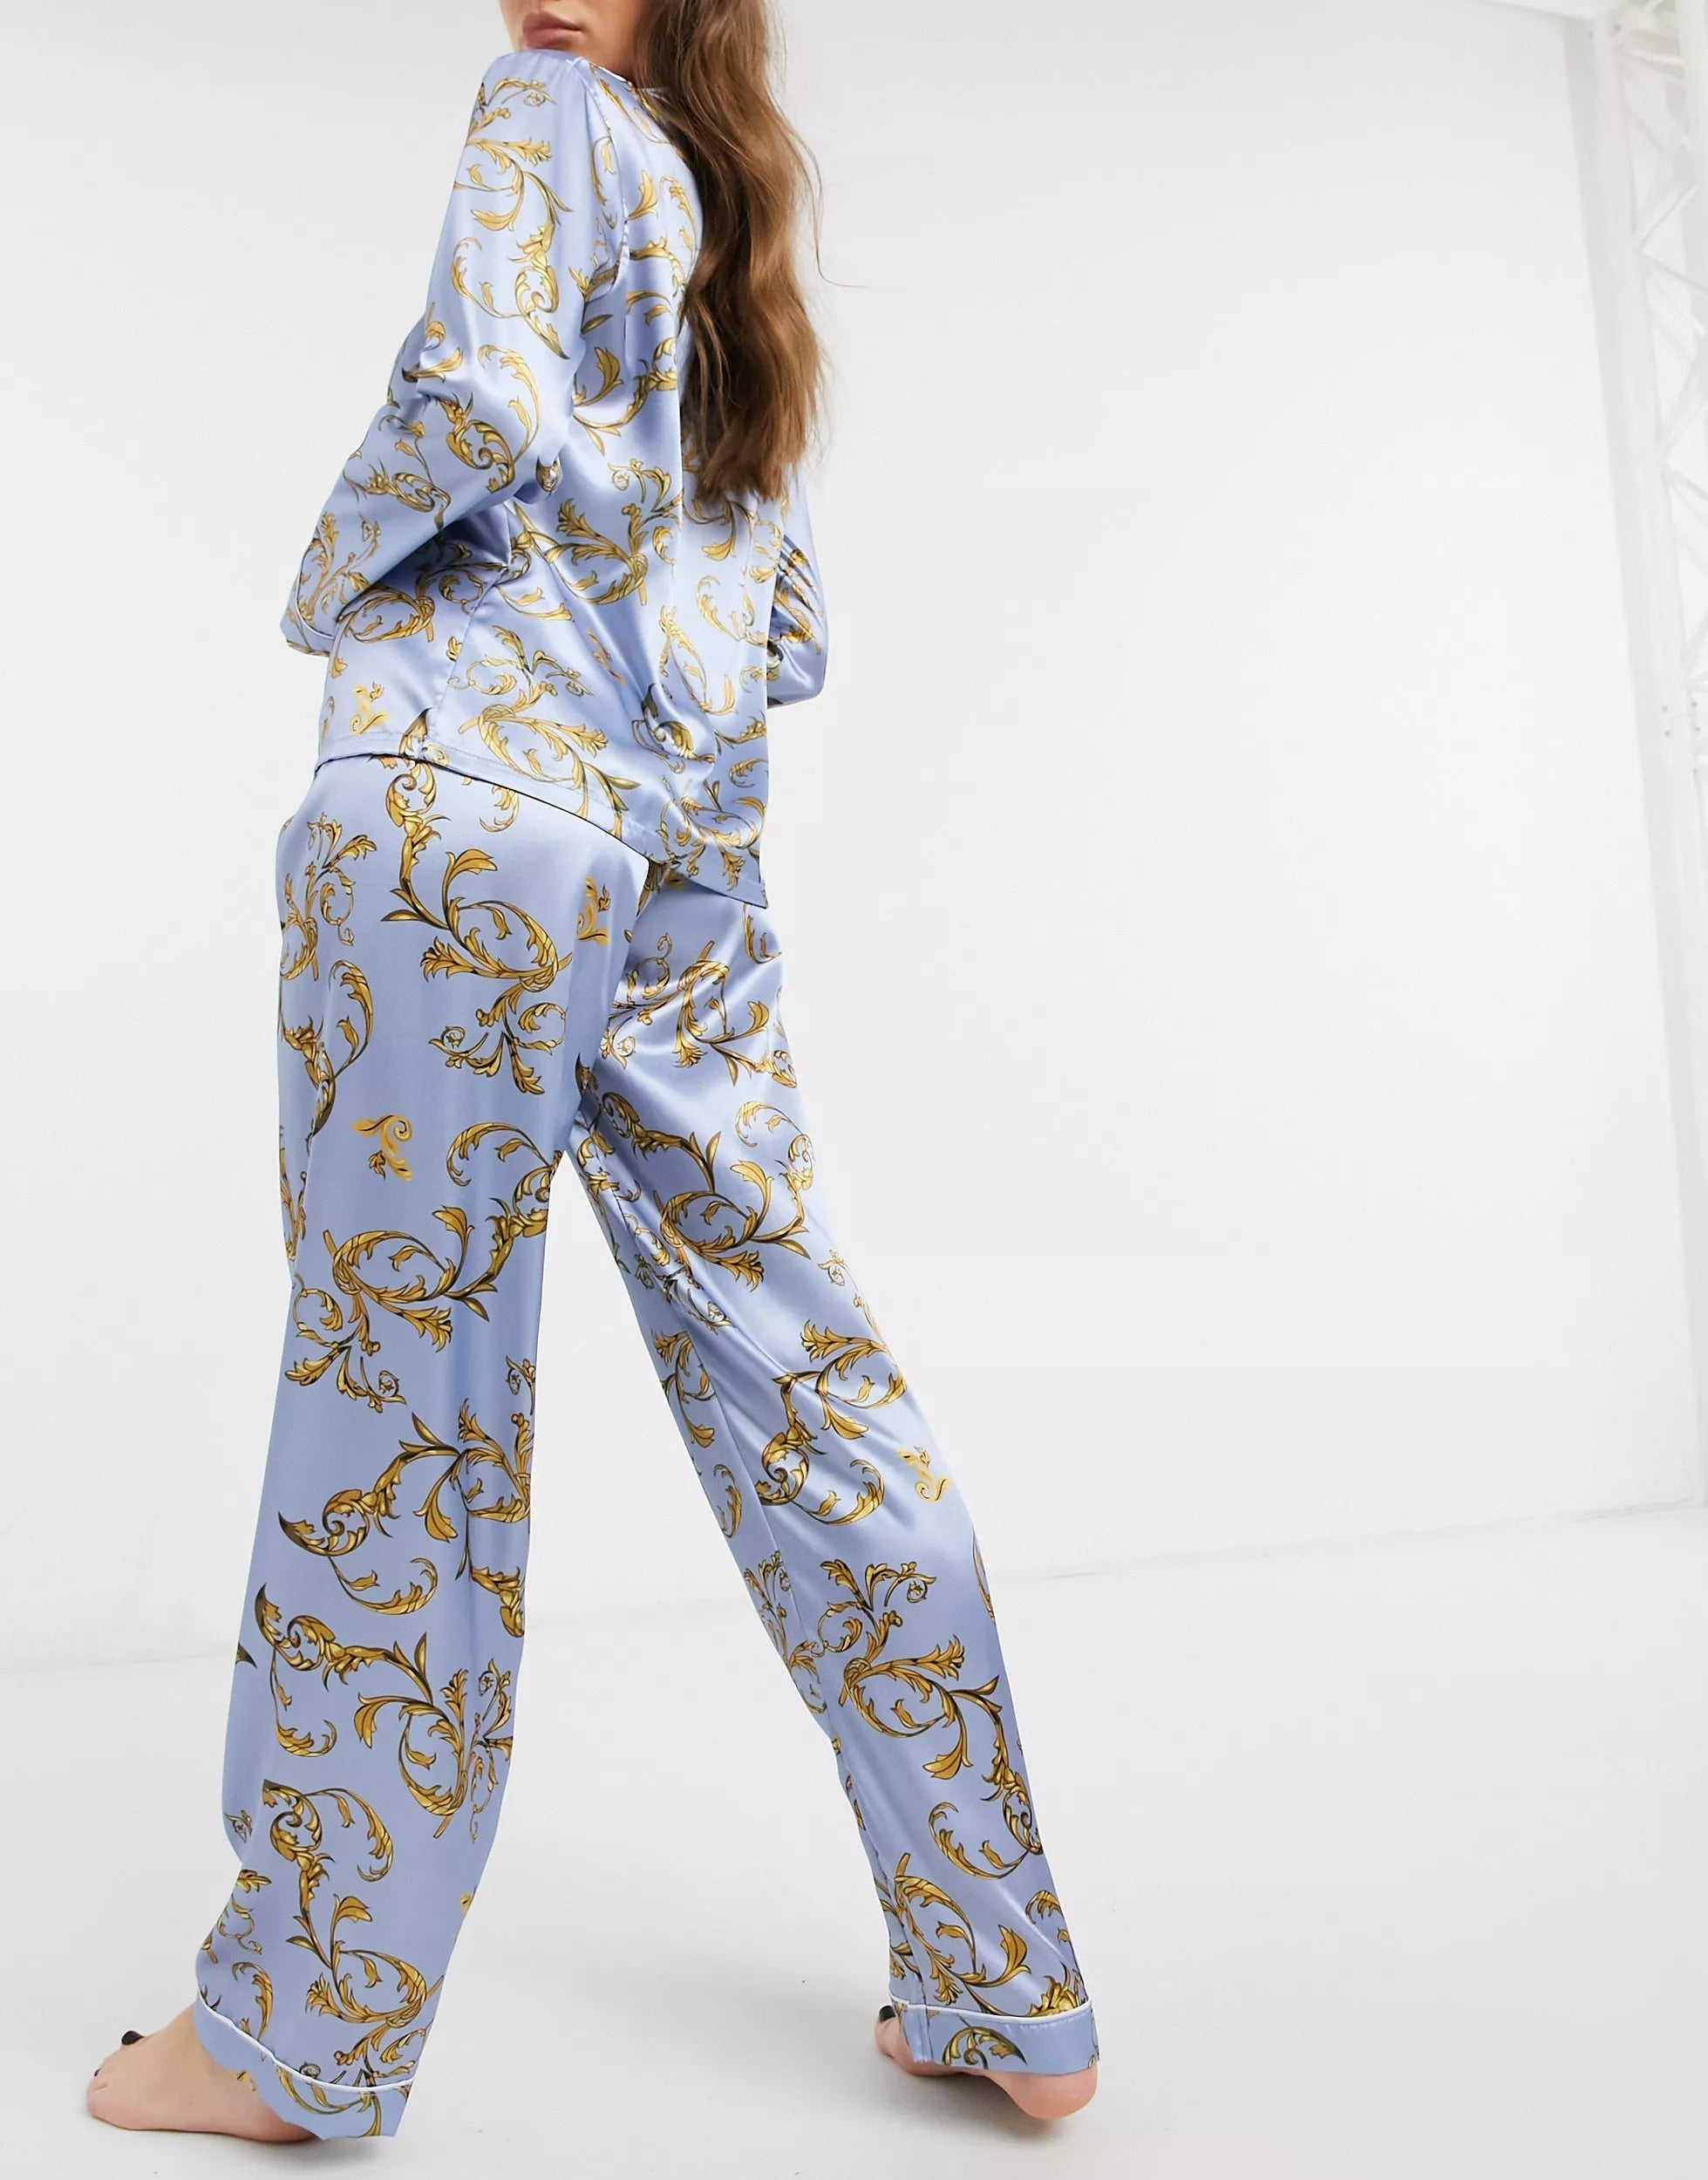 Lavender Color Digital Abstract Printed loungewear/Nightsuit For Women With Pants.